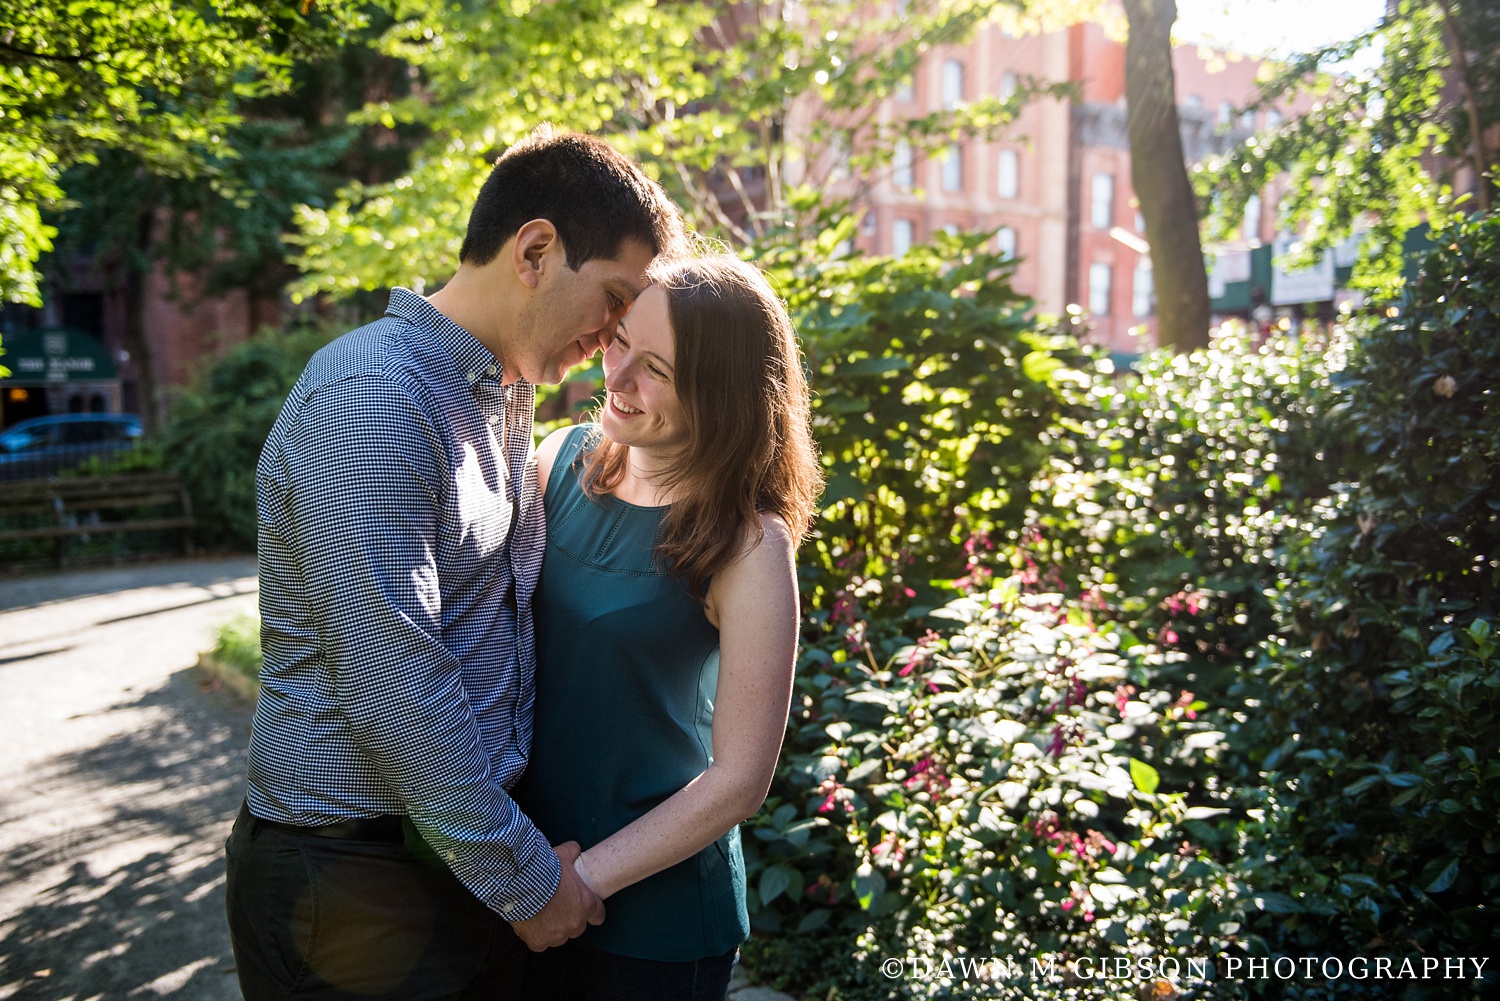 Katie and Andre's Engagement Session | Photos by Dawn M Gibson Photography